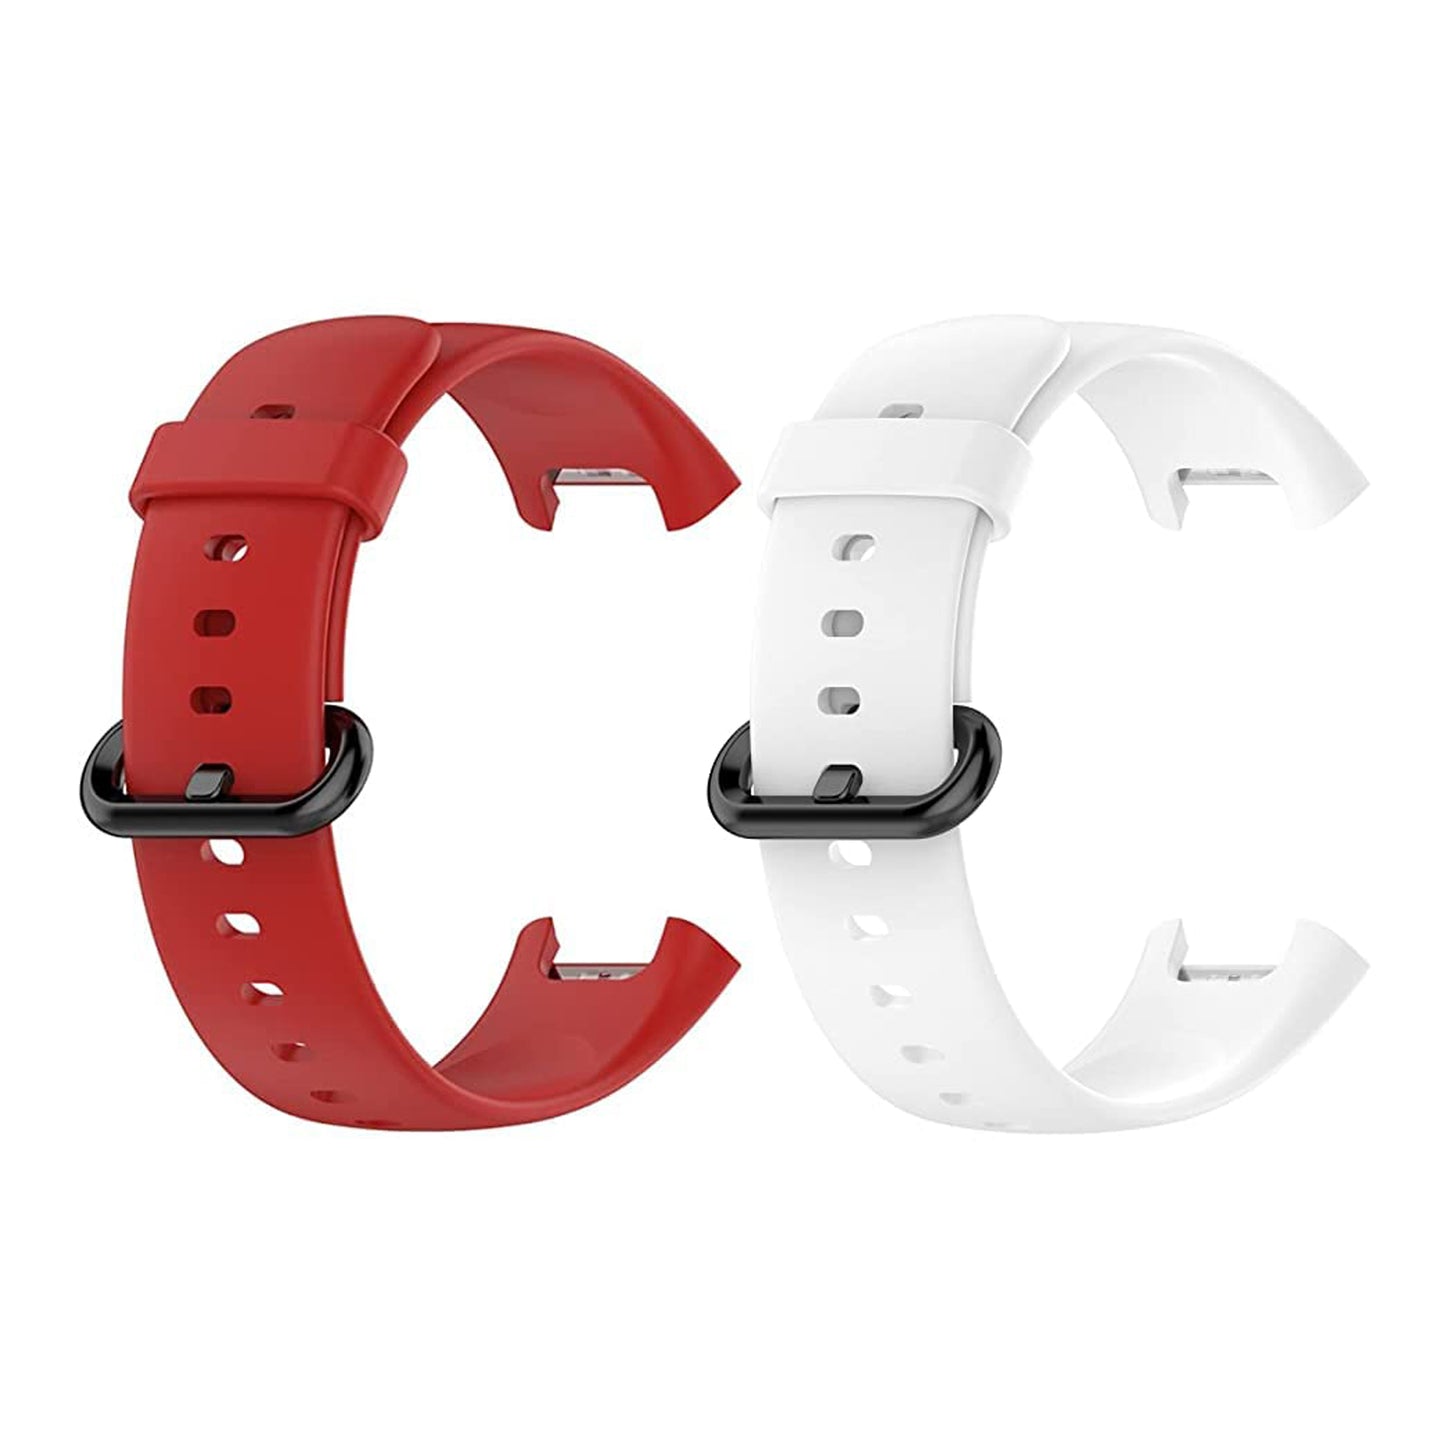 Valente Soft Silicone Buckle watch Strap Compatible for Redmi Watch 2 Lite & Redmi GPS Watch Only (Watch Not included) (Pack of 2)